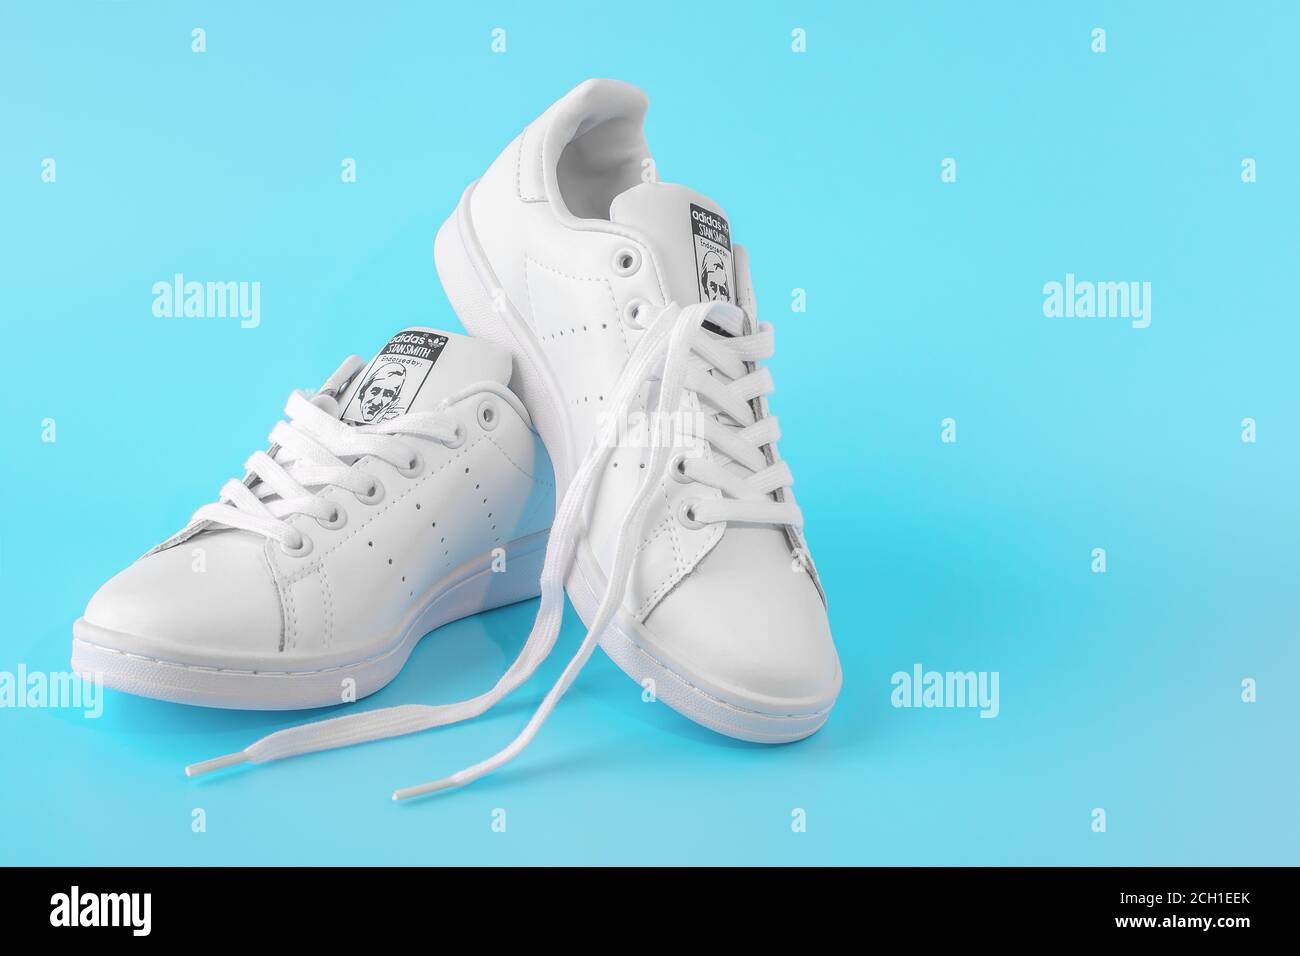 Moscow, Russia - JULY 30, 2020: White shoes Adidas Stan Smith, Photo of new  white sneakers on blue background. Adidas is an international company the  Stock Photo - Alamy